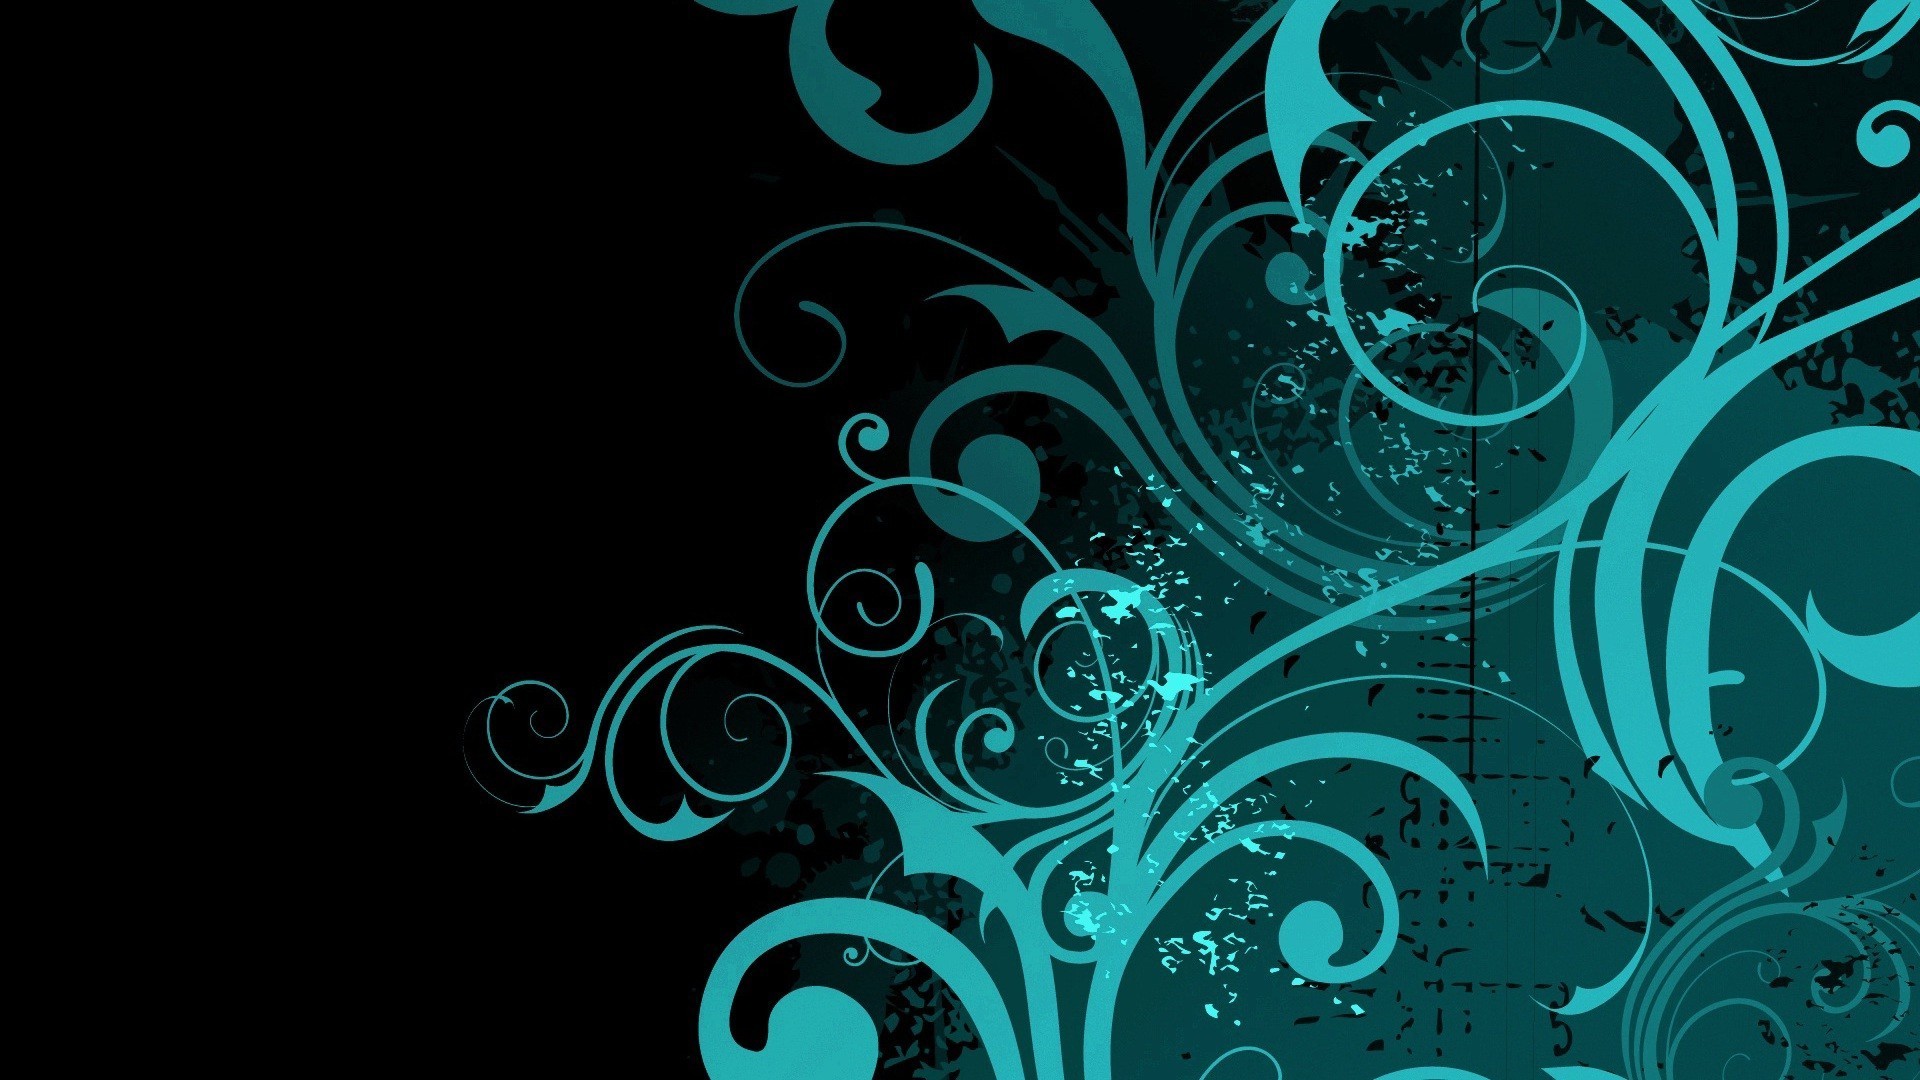 1920x1080 Full HD Wallpapers: Swirl Wallpapers, Swirl Backgrounds For .